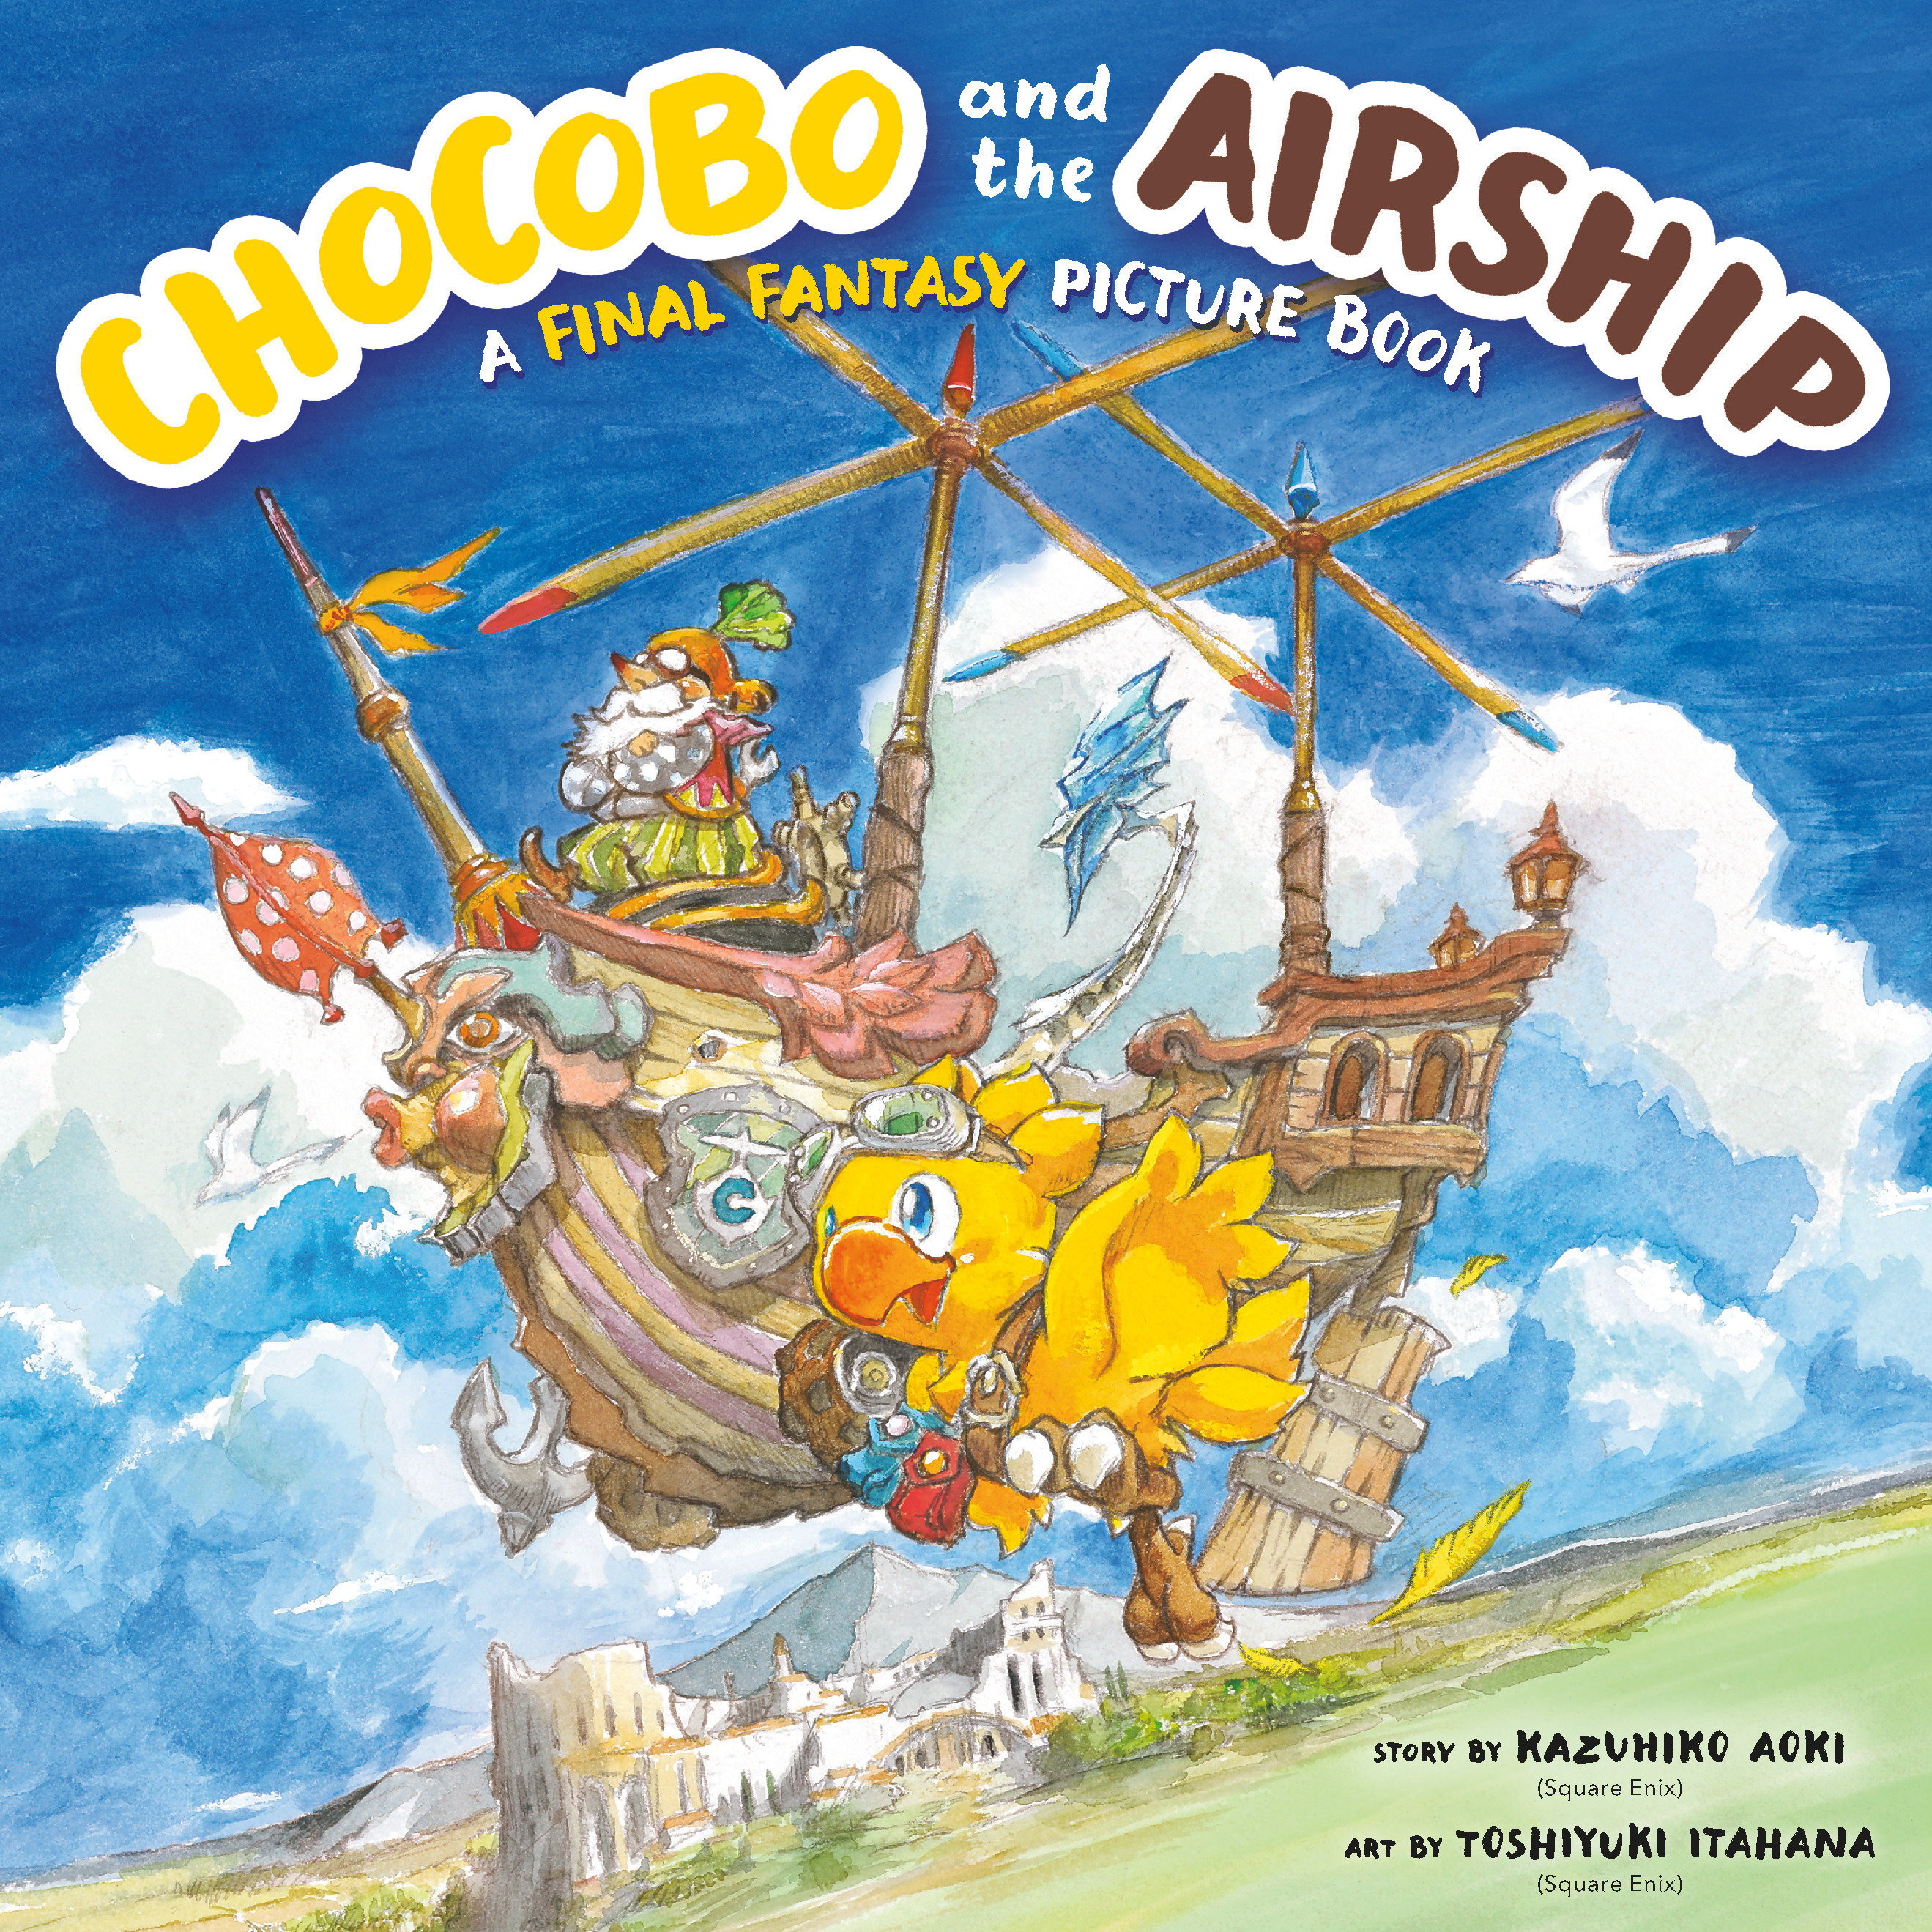 Chocobo and the Airship - A Final Fantasy Picture Book